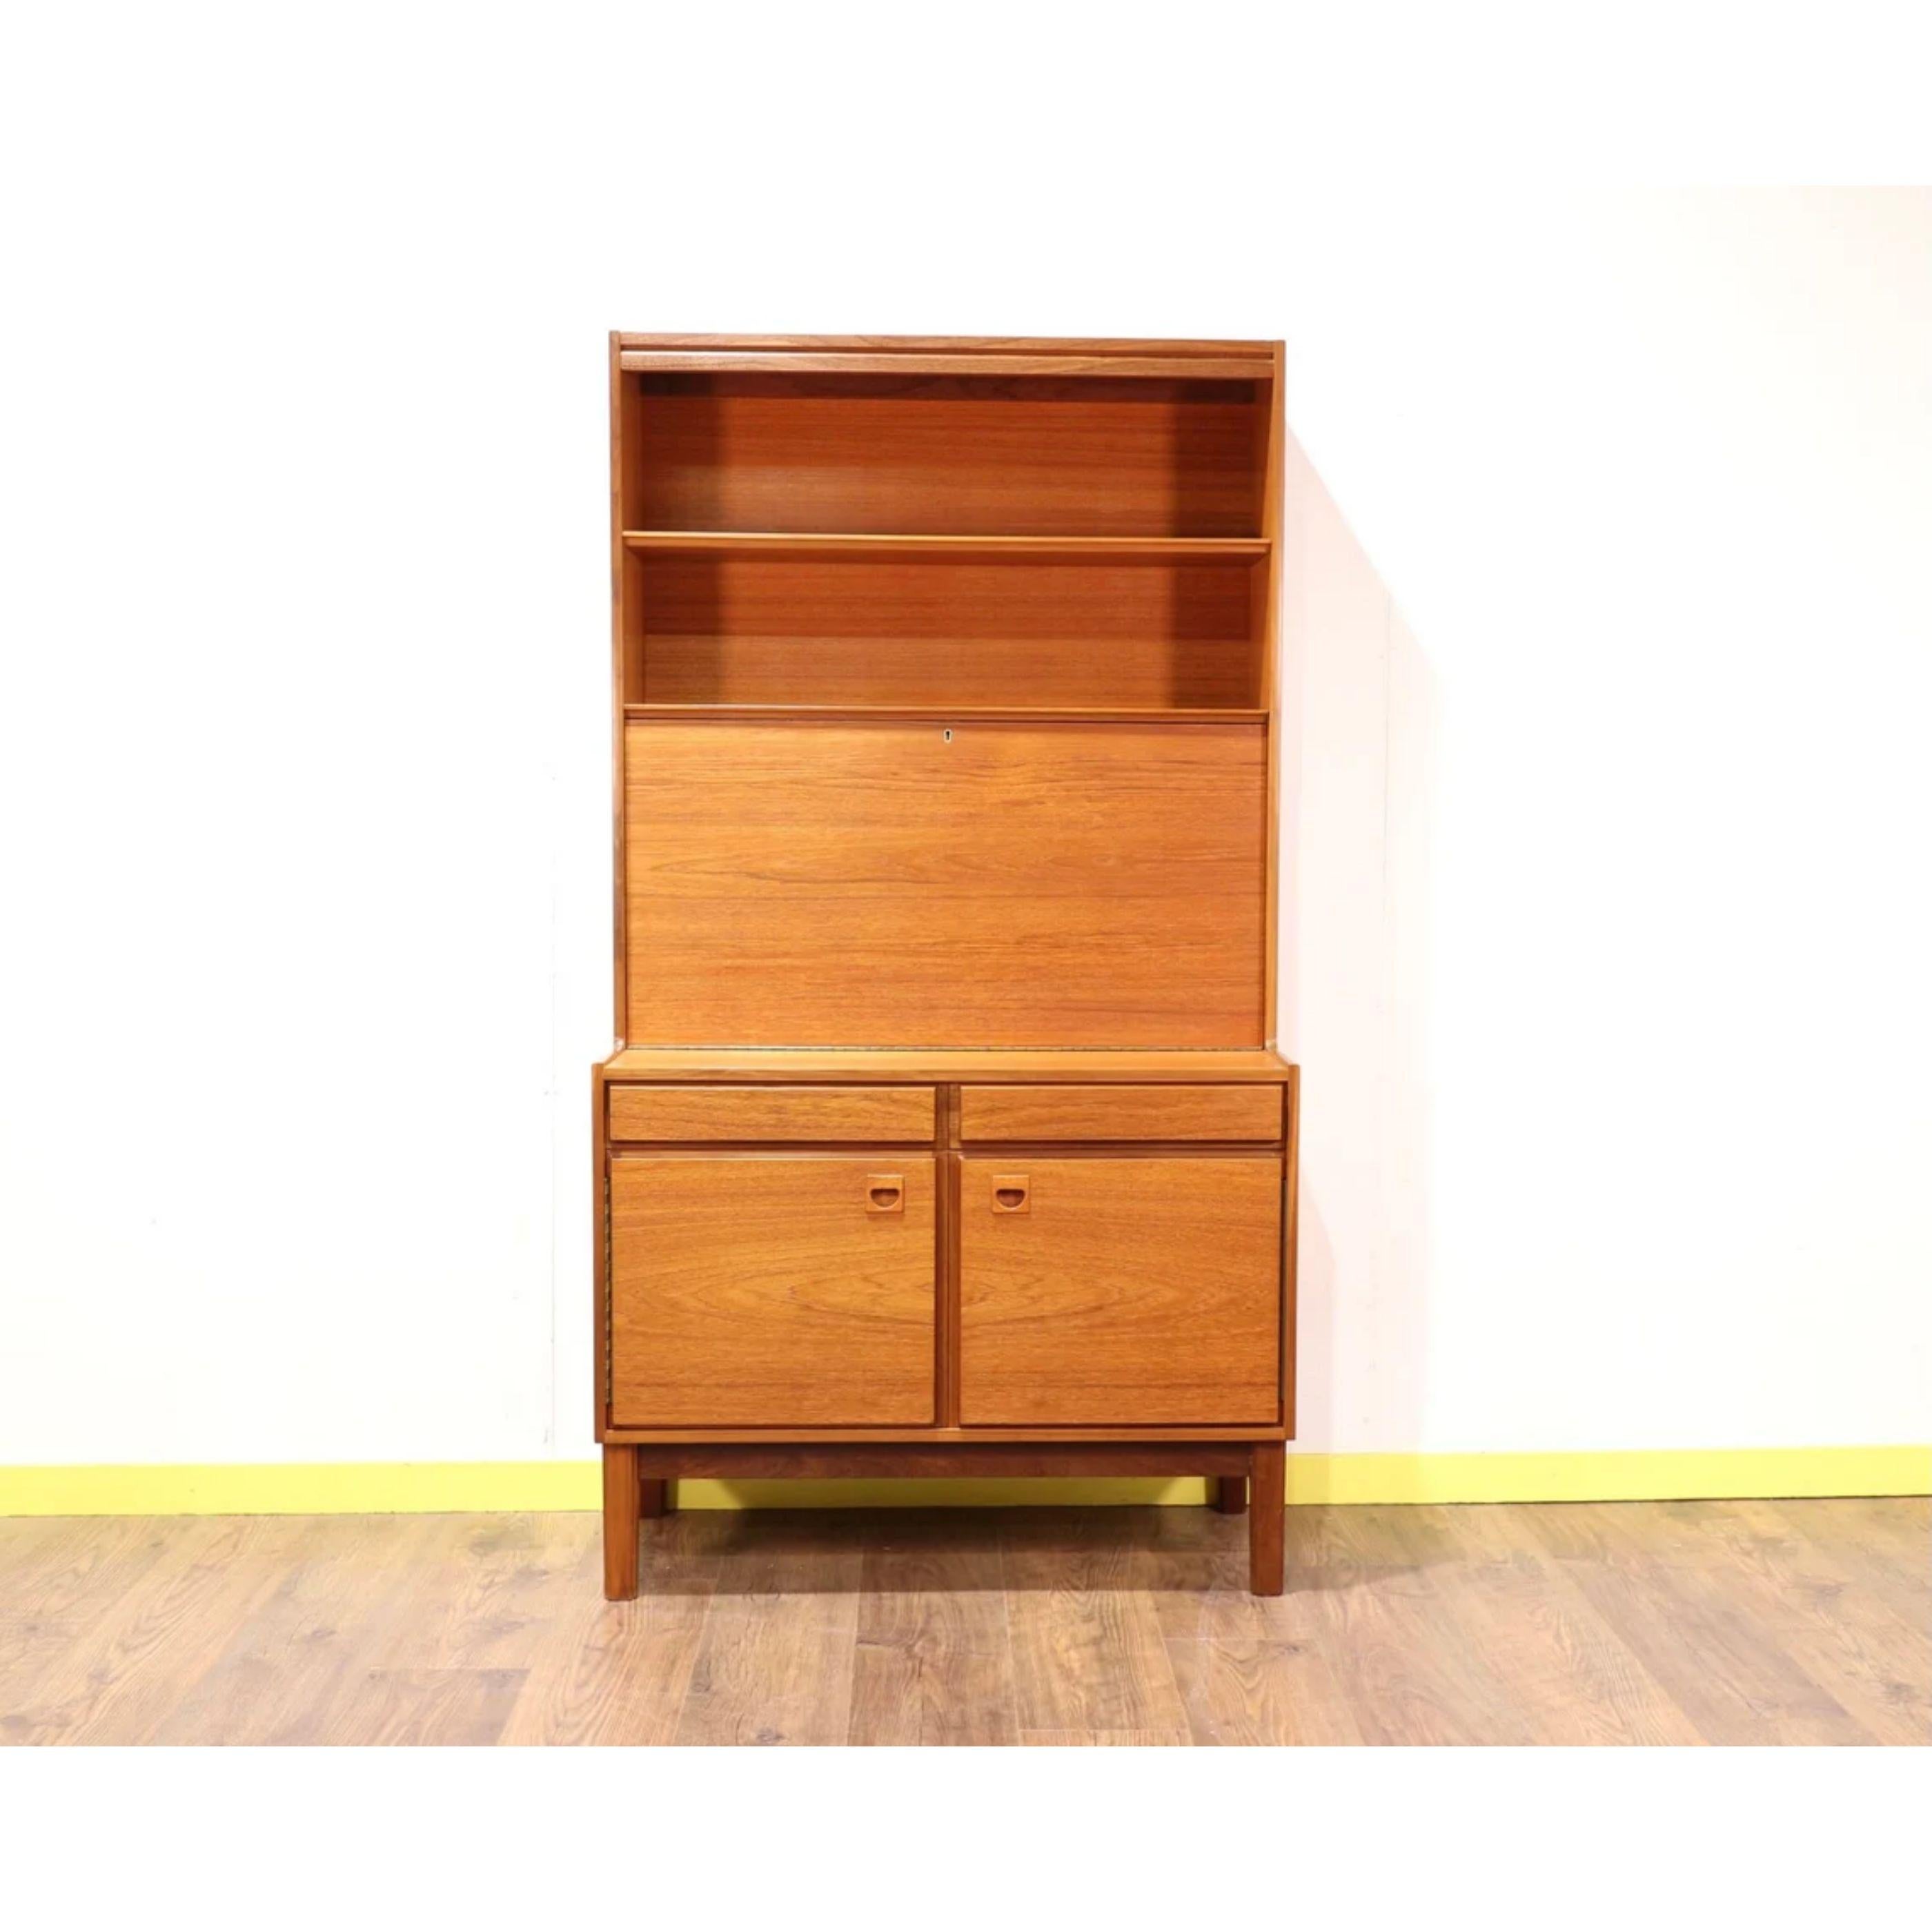 This gorgeous mid century bureau designed by Peter Hanson for Vanson is a real statement piece as well as being very practical. In this new world when working from home is the normal it makes an excellent desk to work at with shelves for storage as